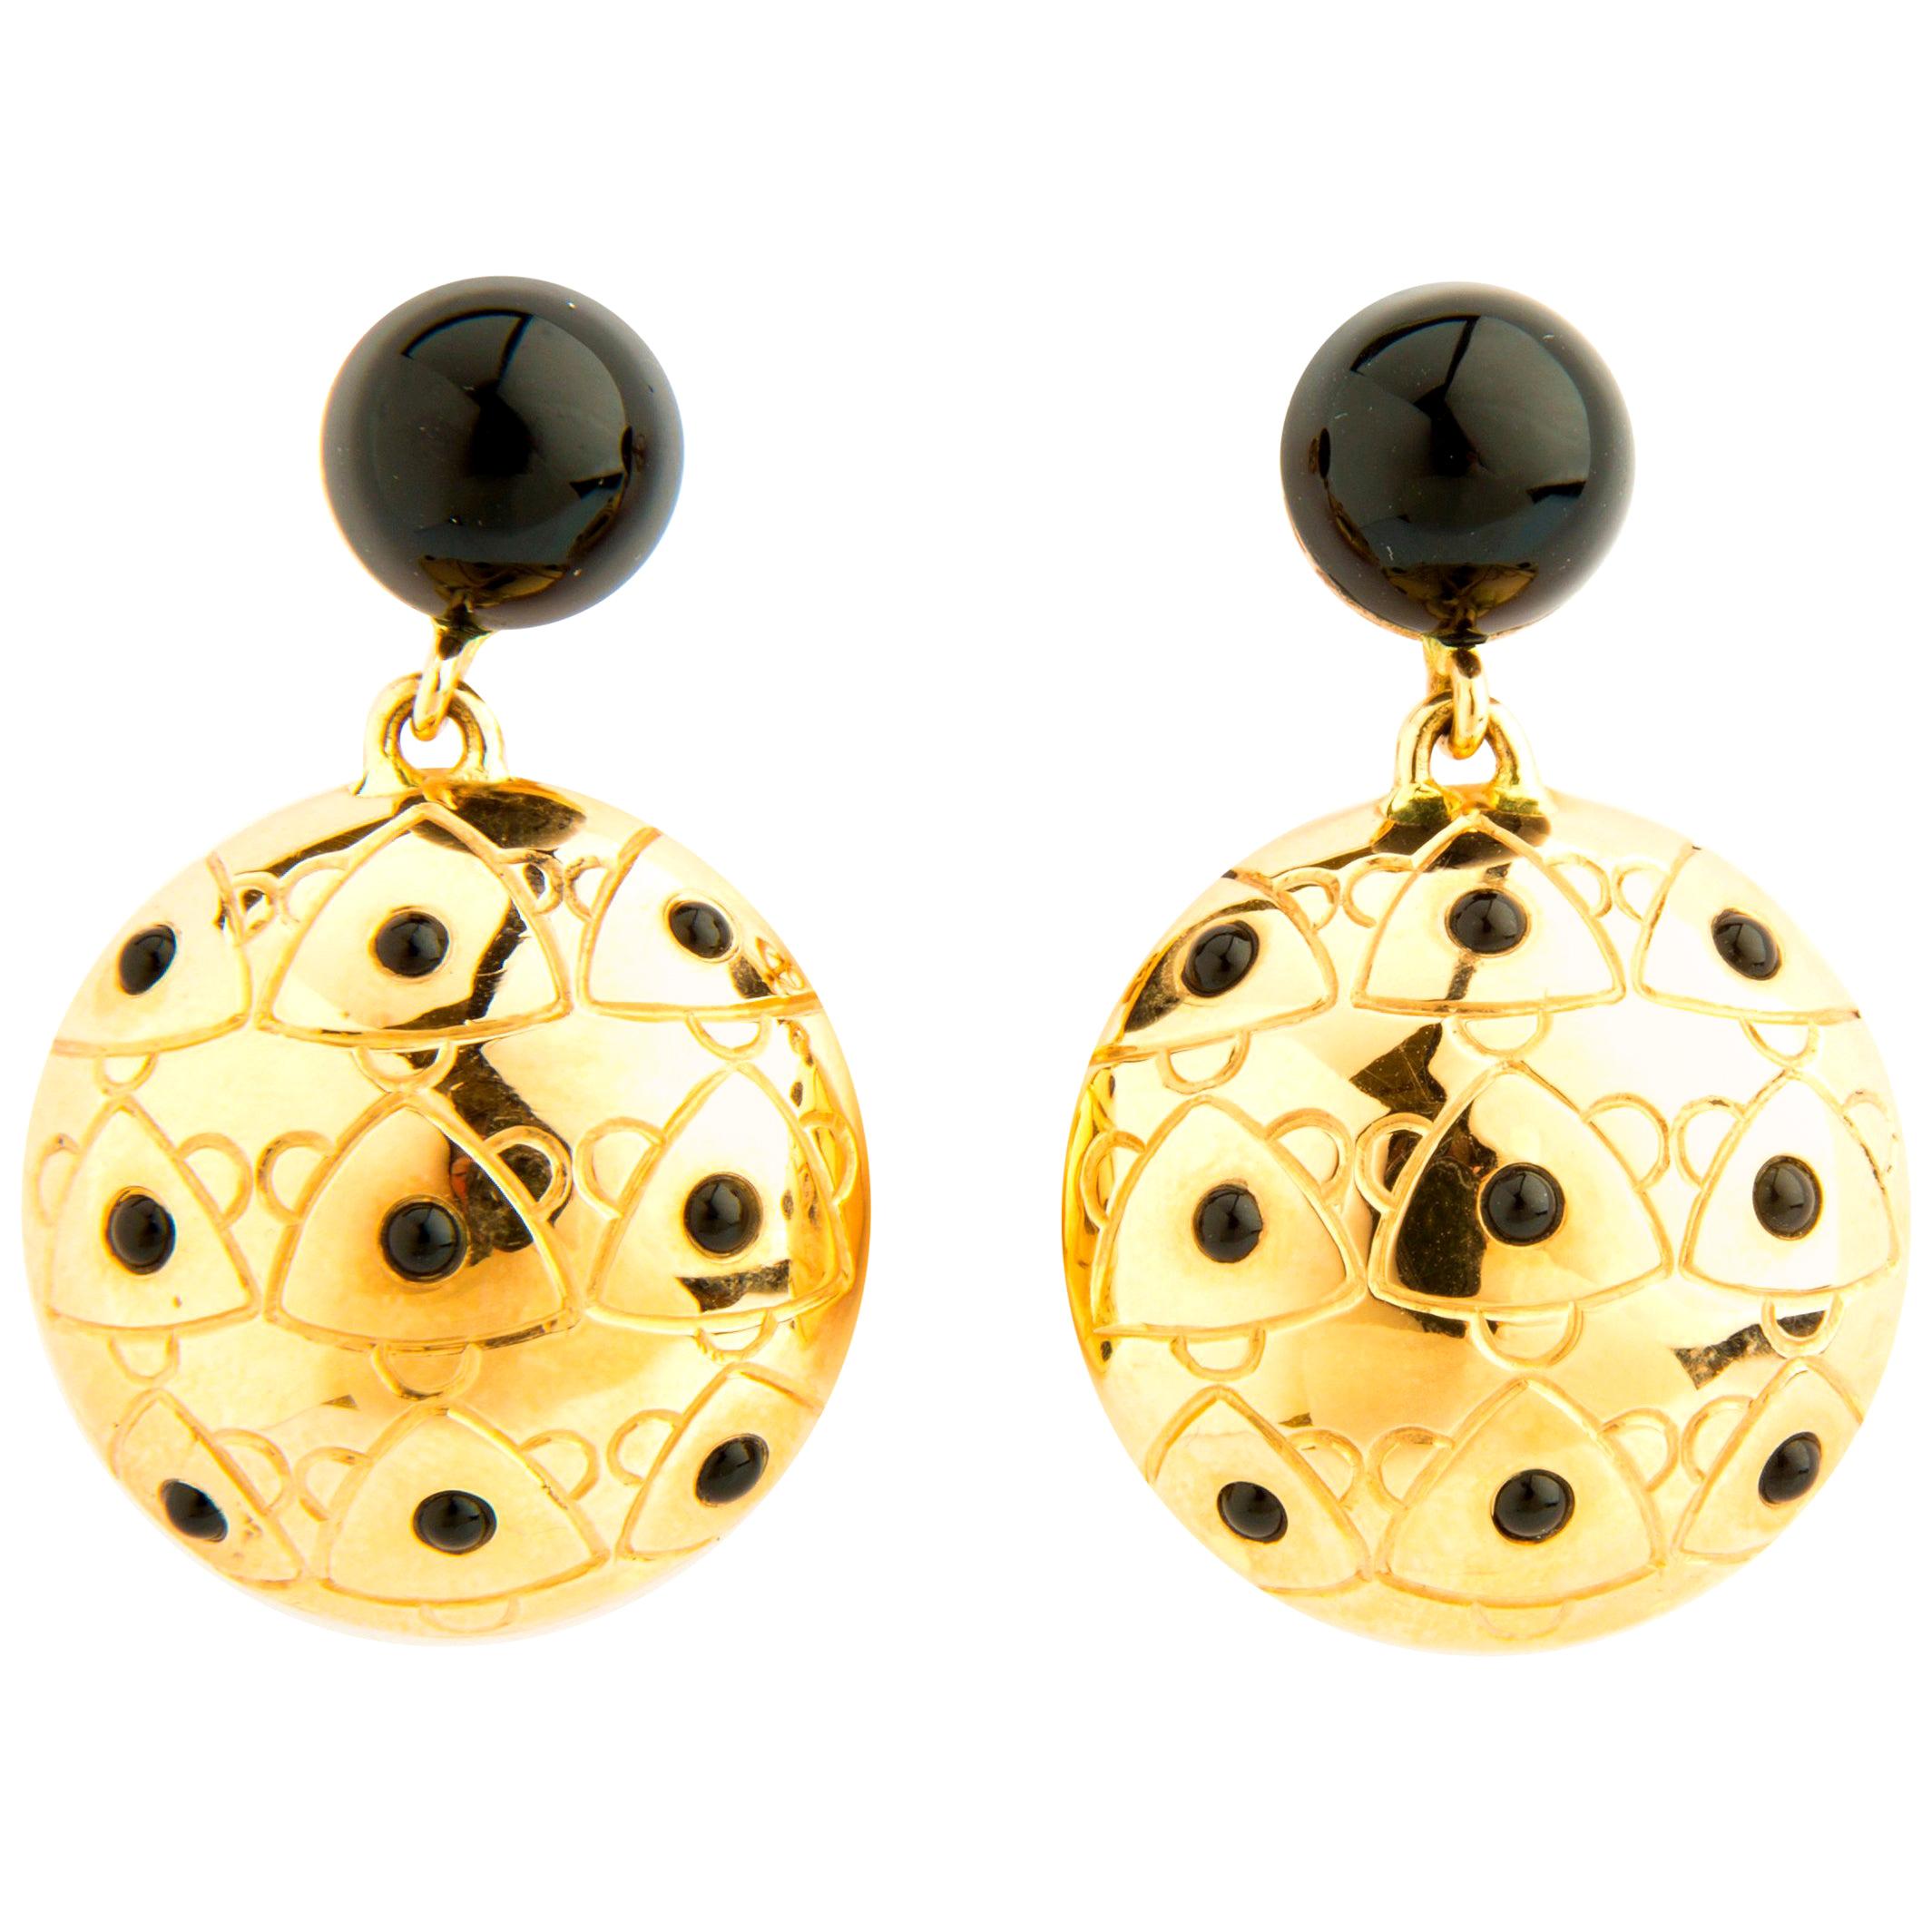 Sea Urchin Earrings with Onyx and Gold 18 Karat For Sale